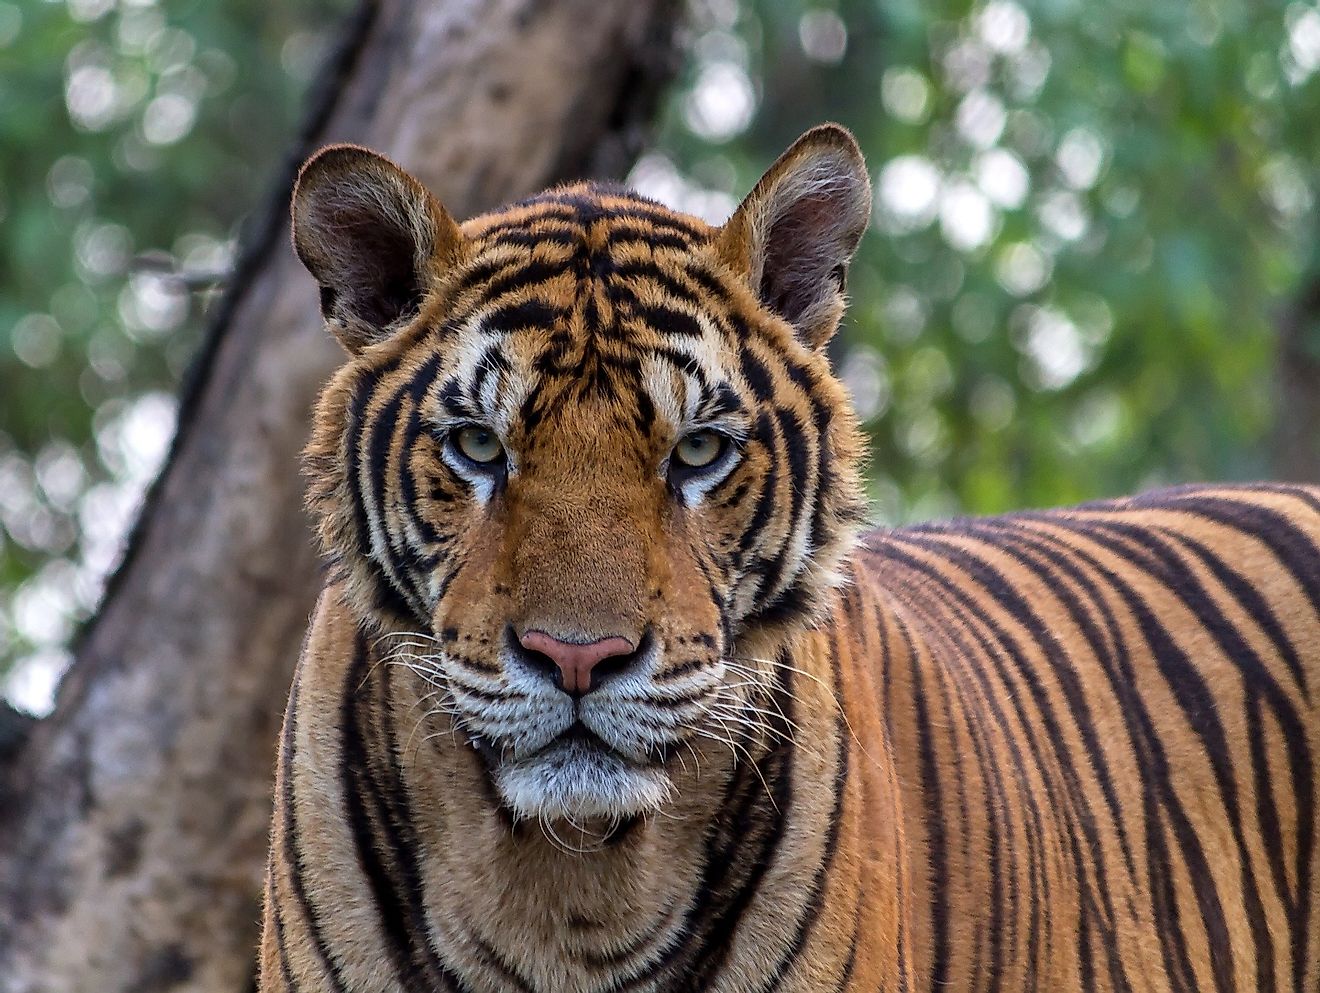 The Bengal tiger is the undisputed ruler of the Indian jungles.